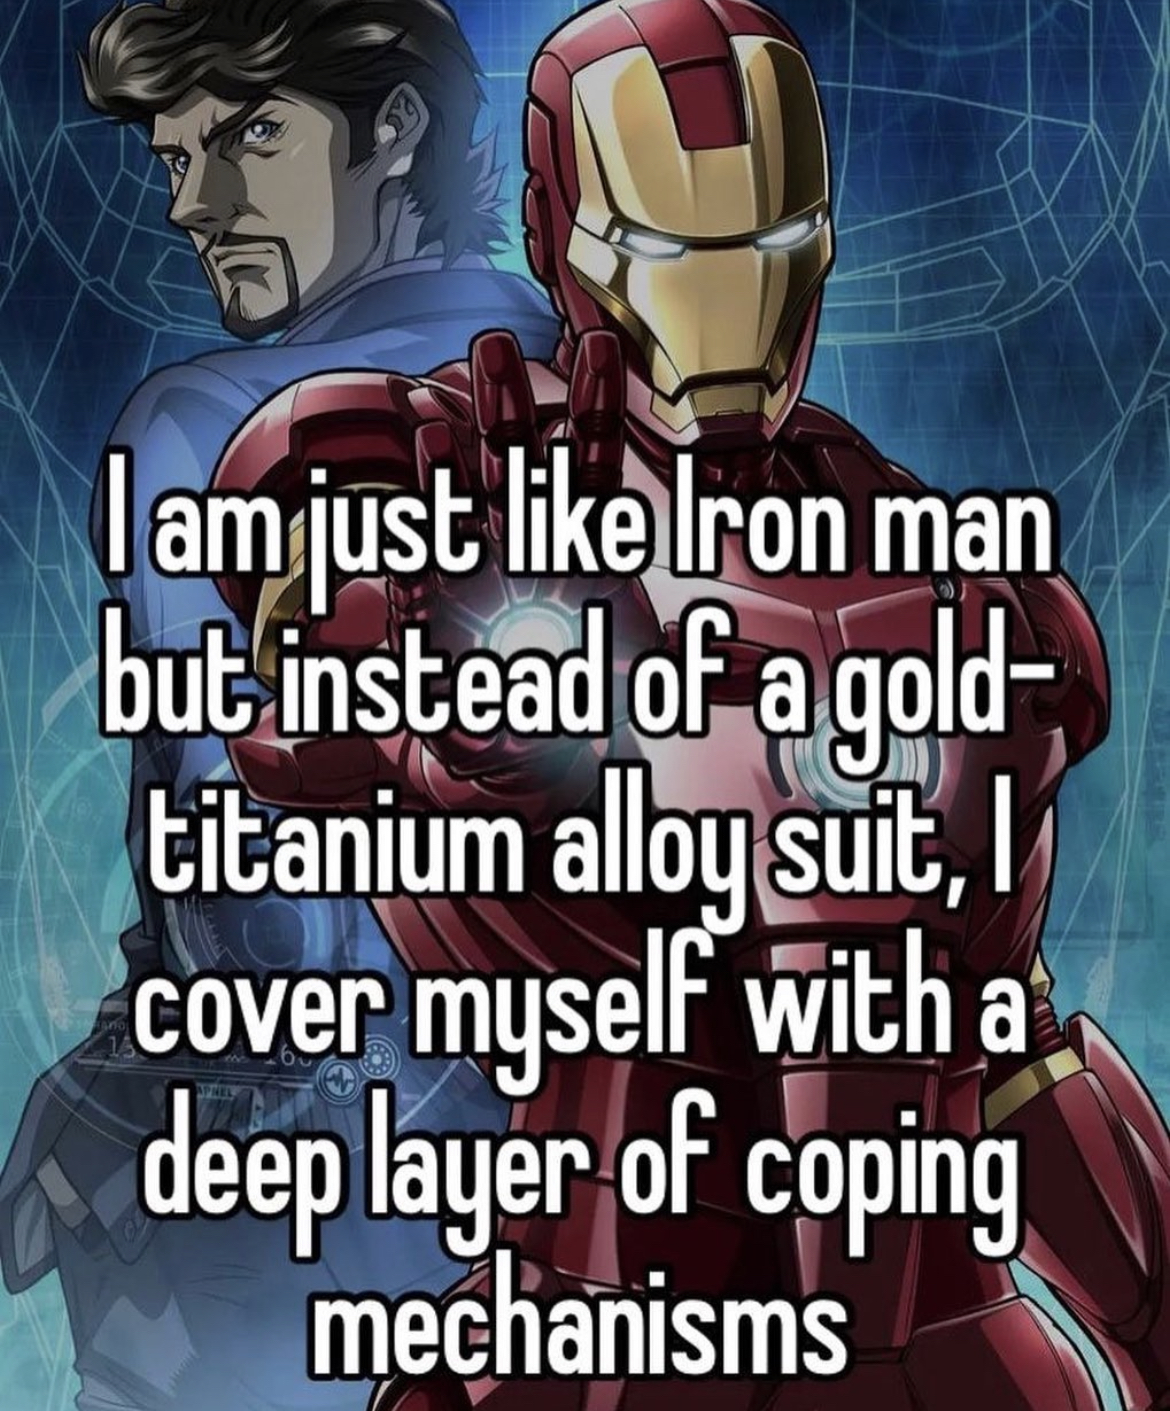 memes and quotes that speak truth - I am just Iron man but instead of a gold titanium alloy suit, I cover myself with a deep layer of coping mechanisms